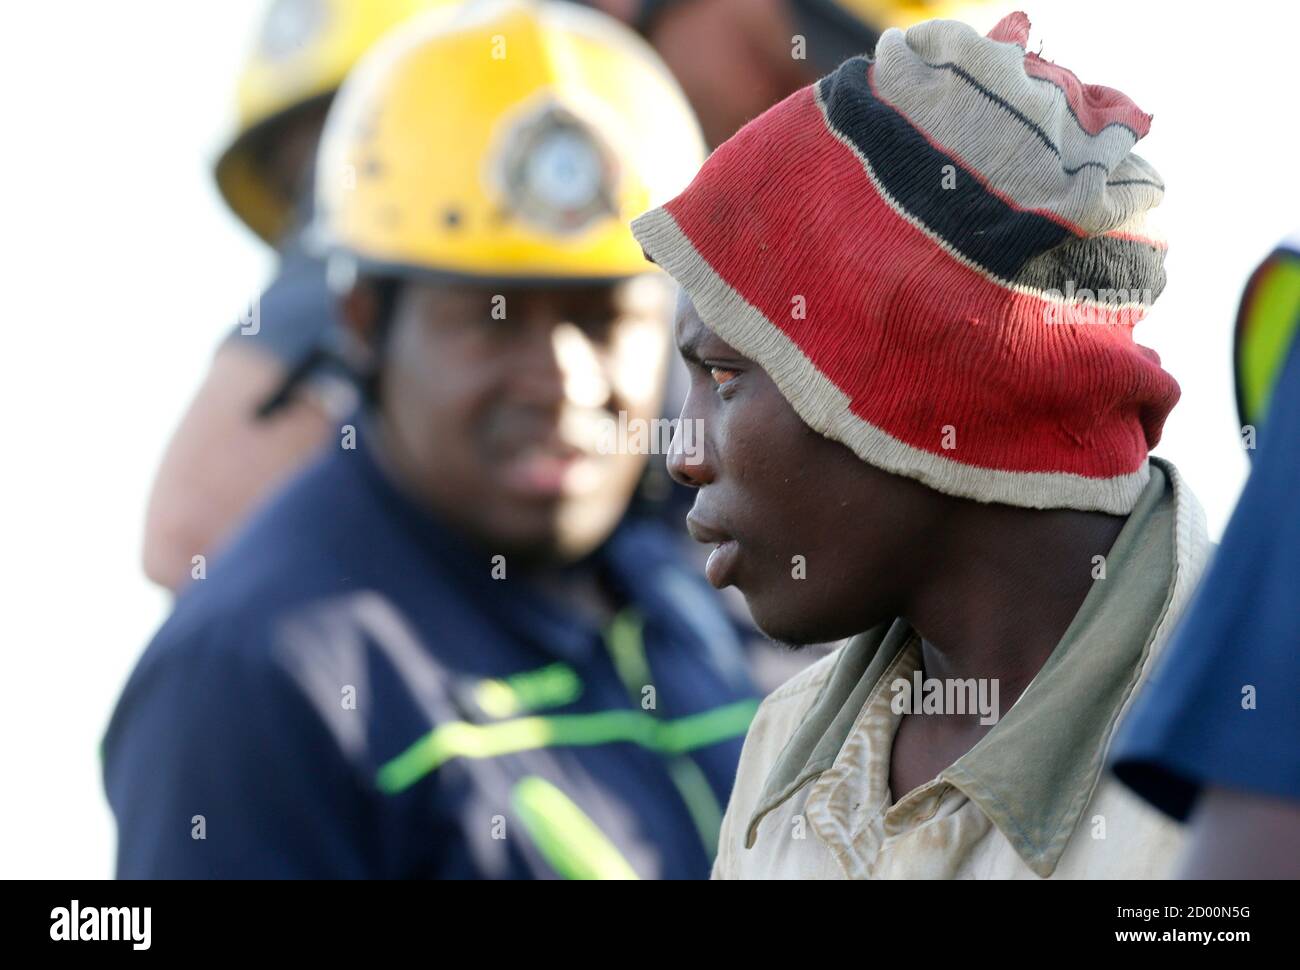 A suspected illegal miner is led away after being rescued from an abandoned gold shaft in Benoni, east of Johannesburg, February 16, 2014. South African rescuers started bringing to the surface at least 30 illegal miners on Sunday who had been trapped by debris in the abandoned gold shaft near Johannesburg, emergency services ER24 spokesman Werner Vermaak said. There were no immediate reports of deaths or injuries. Vermaak later told Reuters that some of the miners still underground were refusing to come up, saying they did not want to be arrested. REUTERS/Mike Hutchings (SOUTH AFRICA - Tags:  Stock Photo